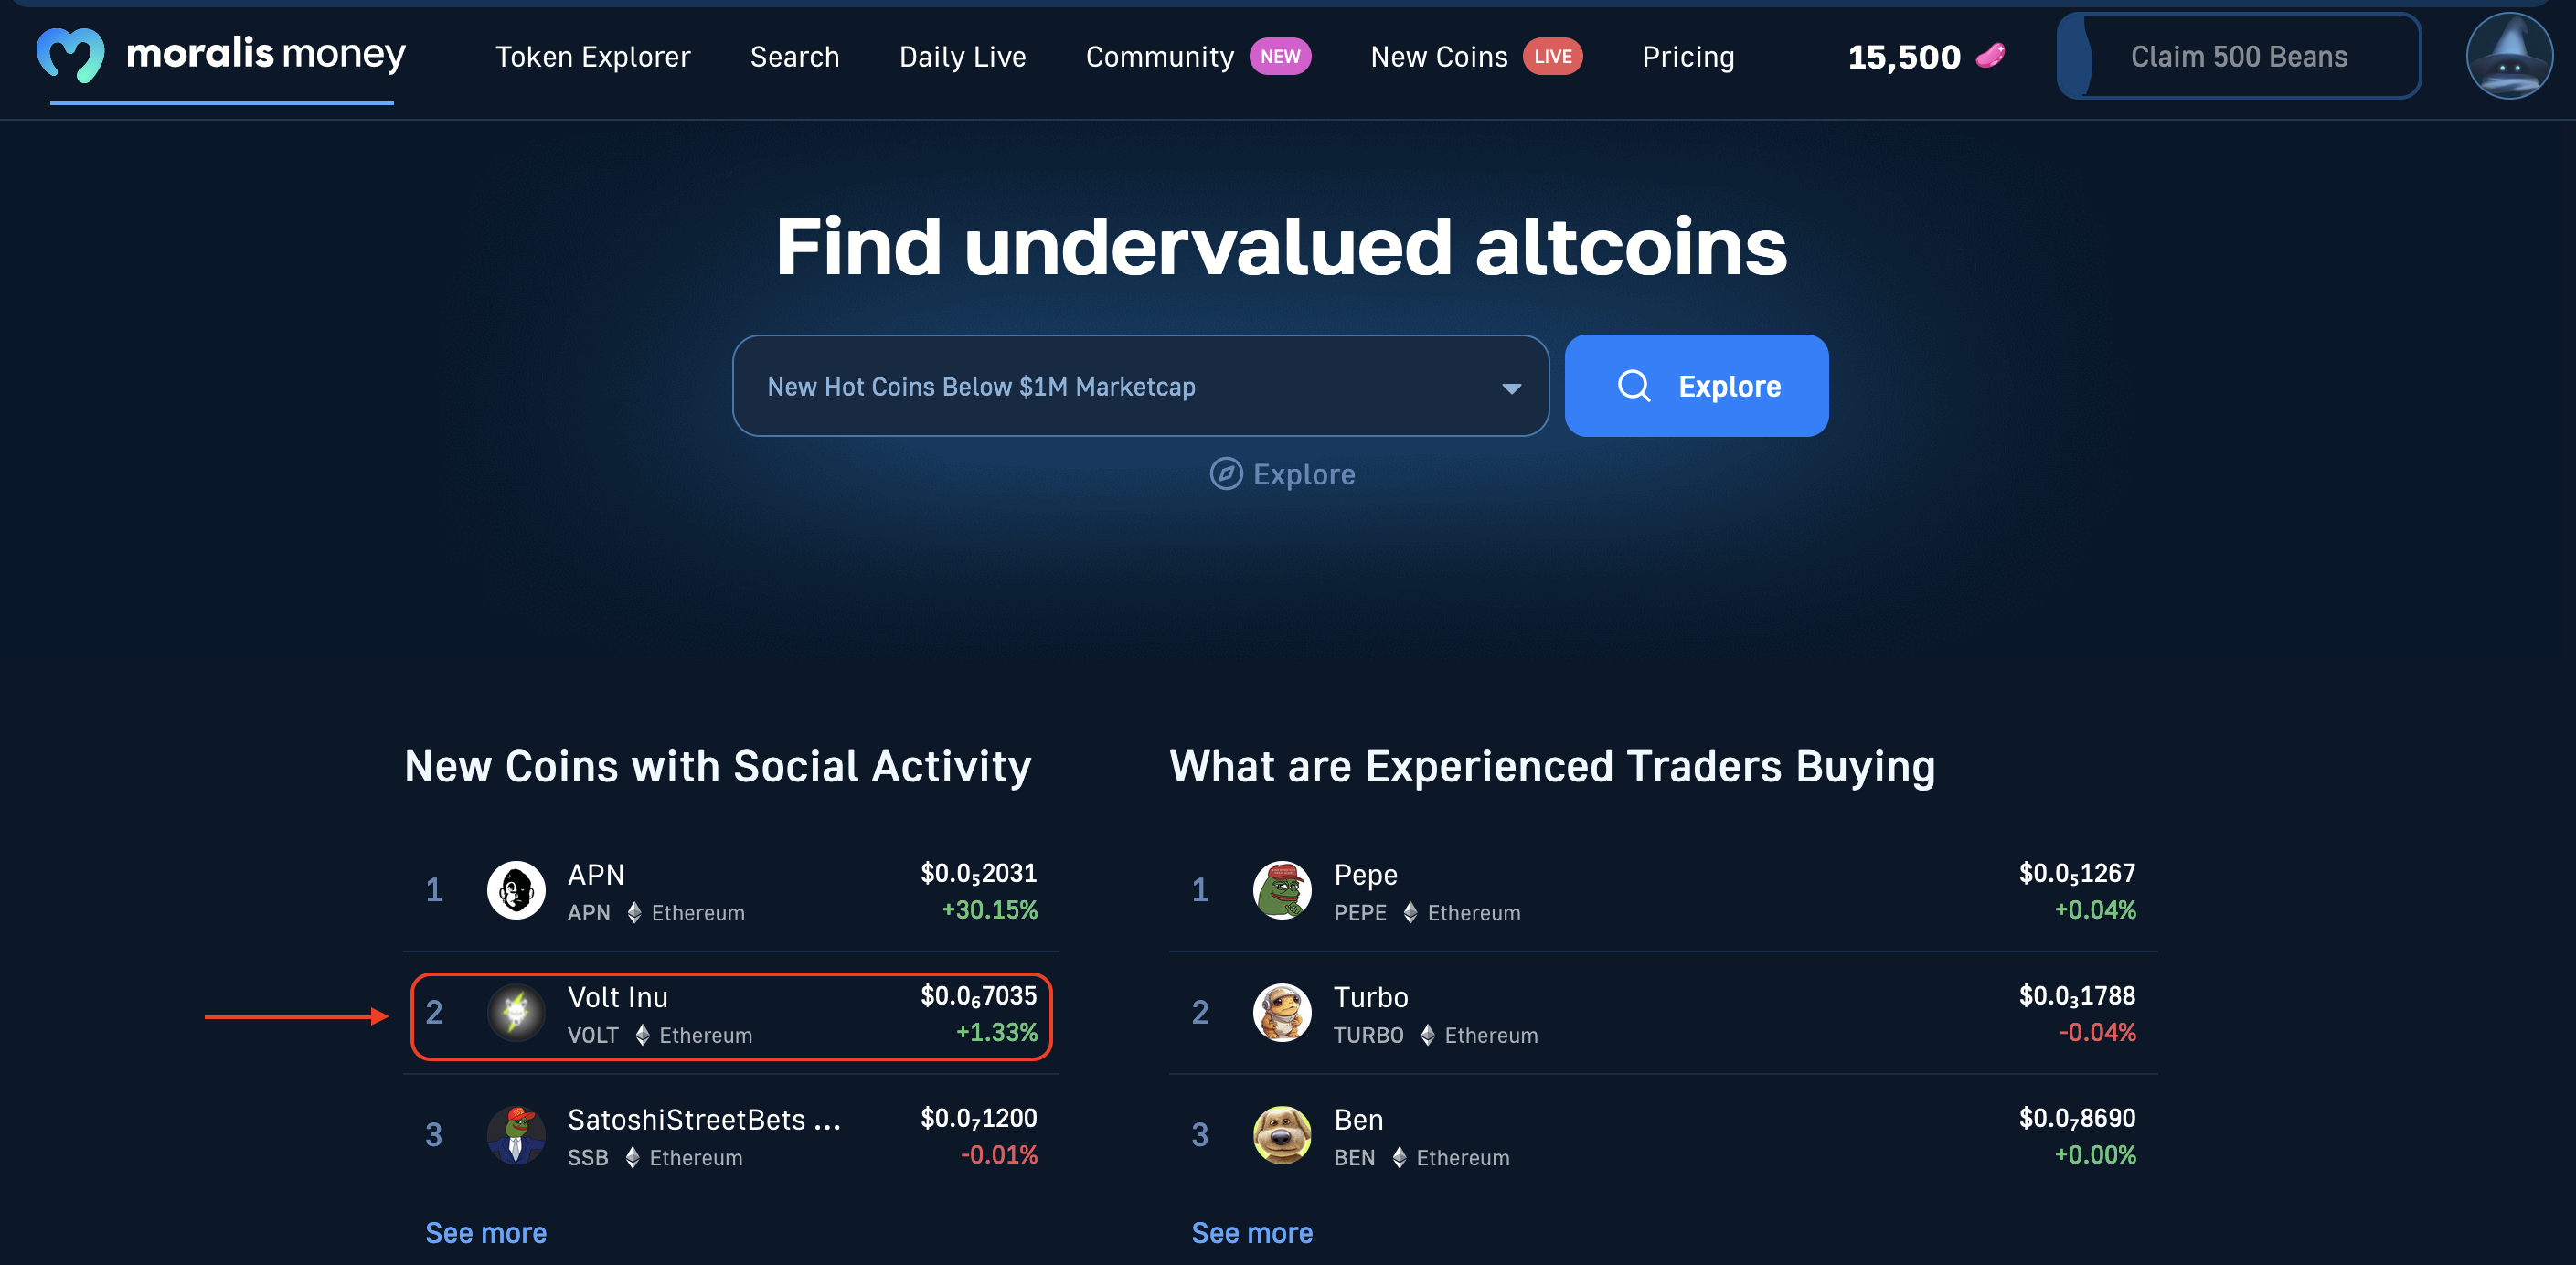 Volt Inu Coin on the Social Media Activity Chart from Moralis Money